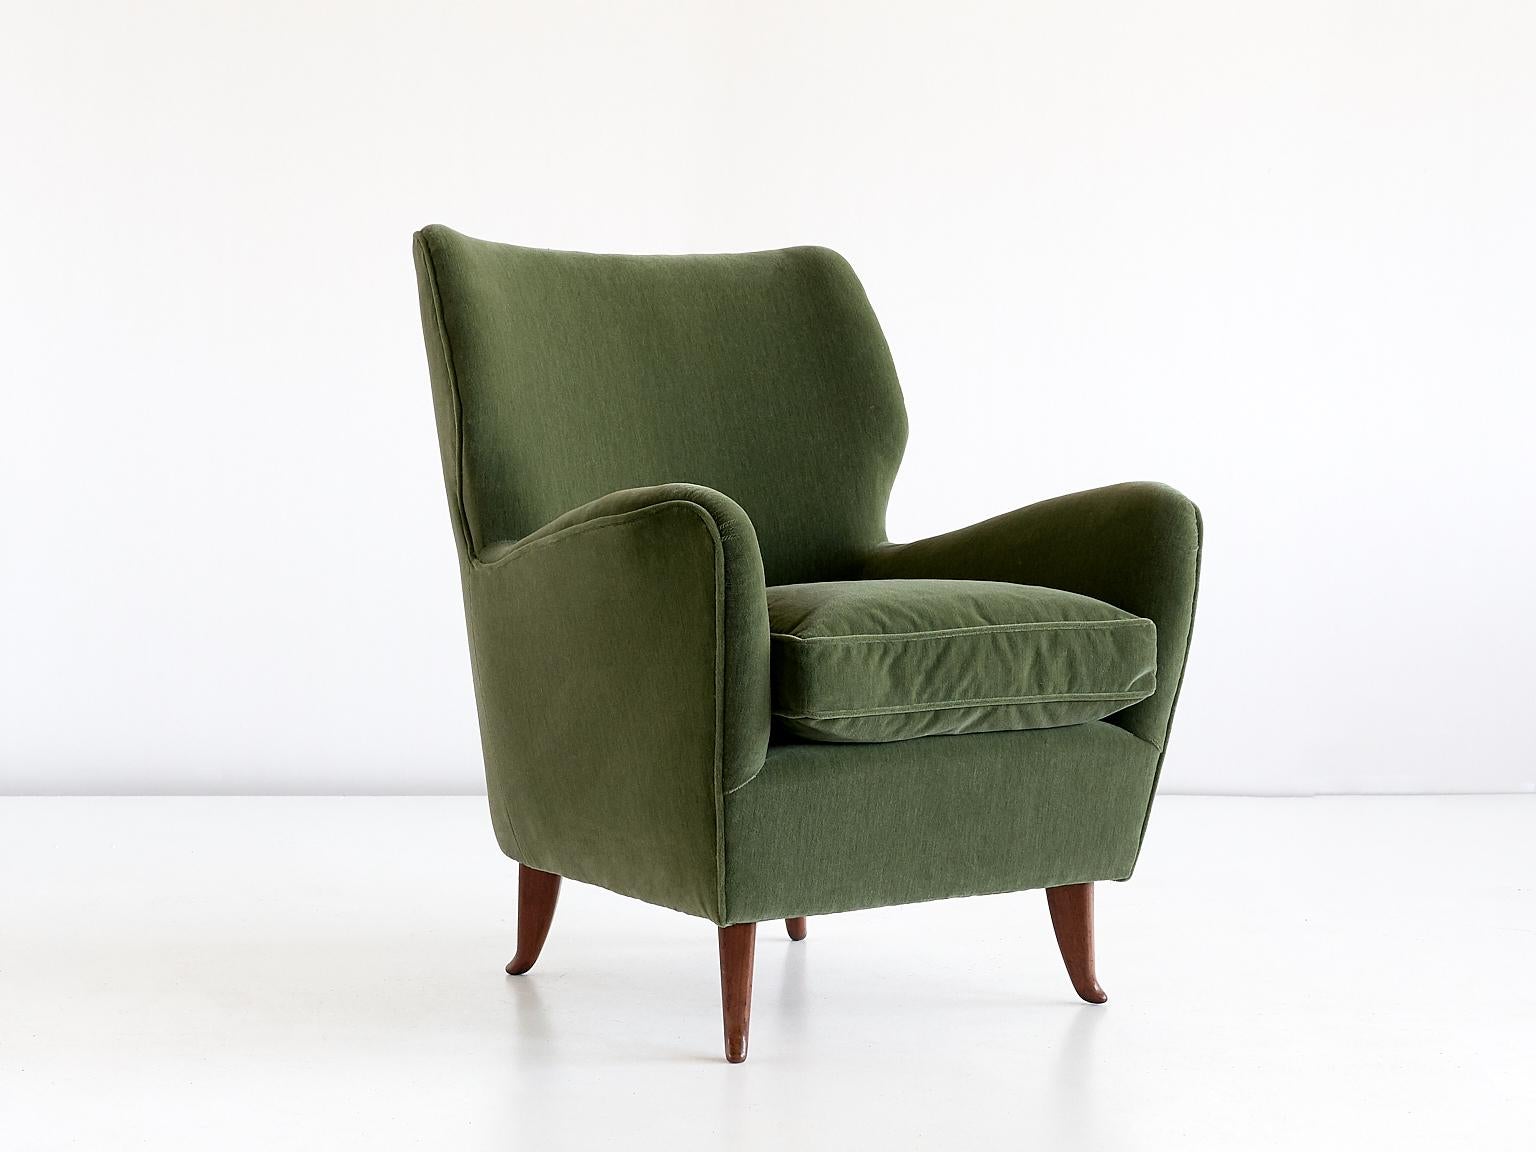 Mid-Century Modern Gio Ponti Pair of Armchairs in Olive Green Velvet and Walnut, Italy, 1949